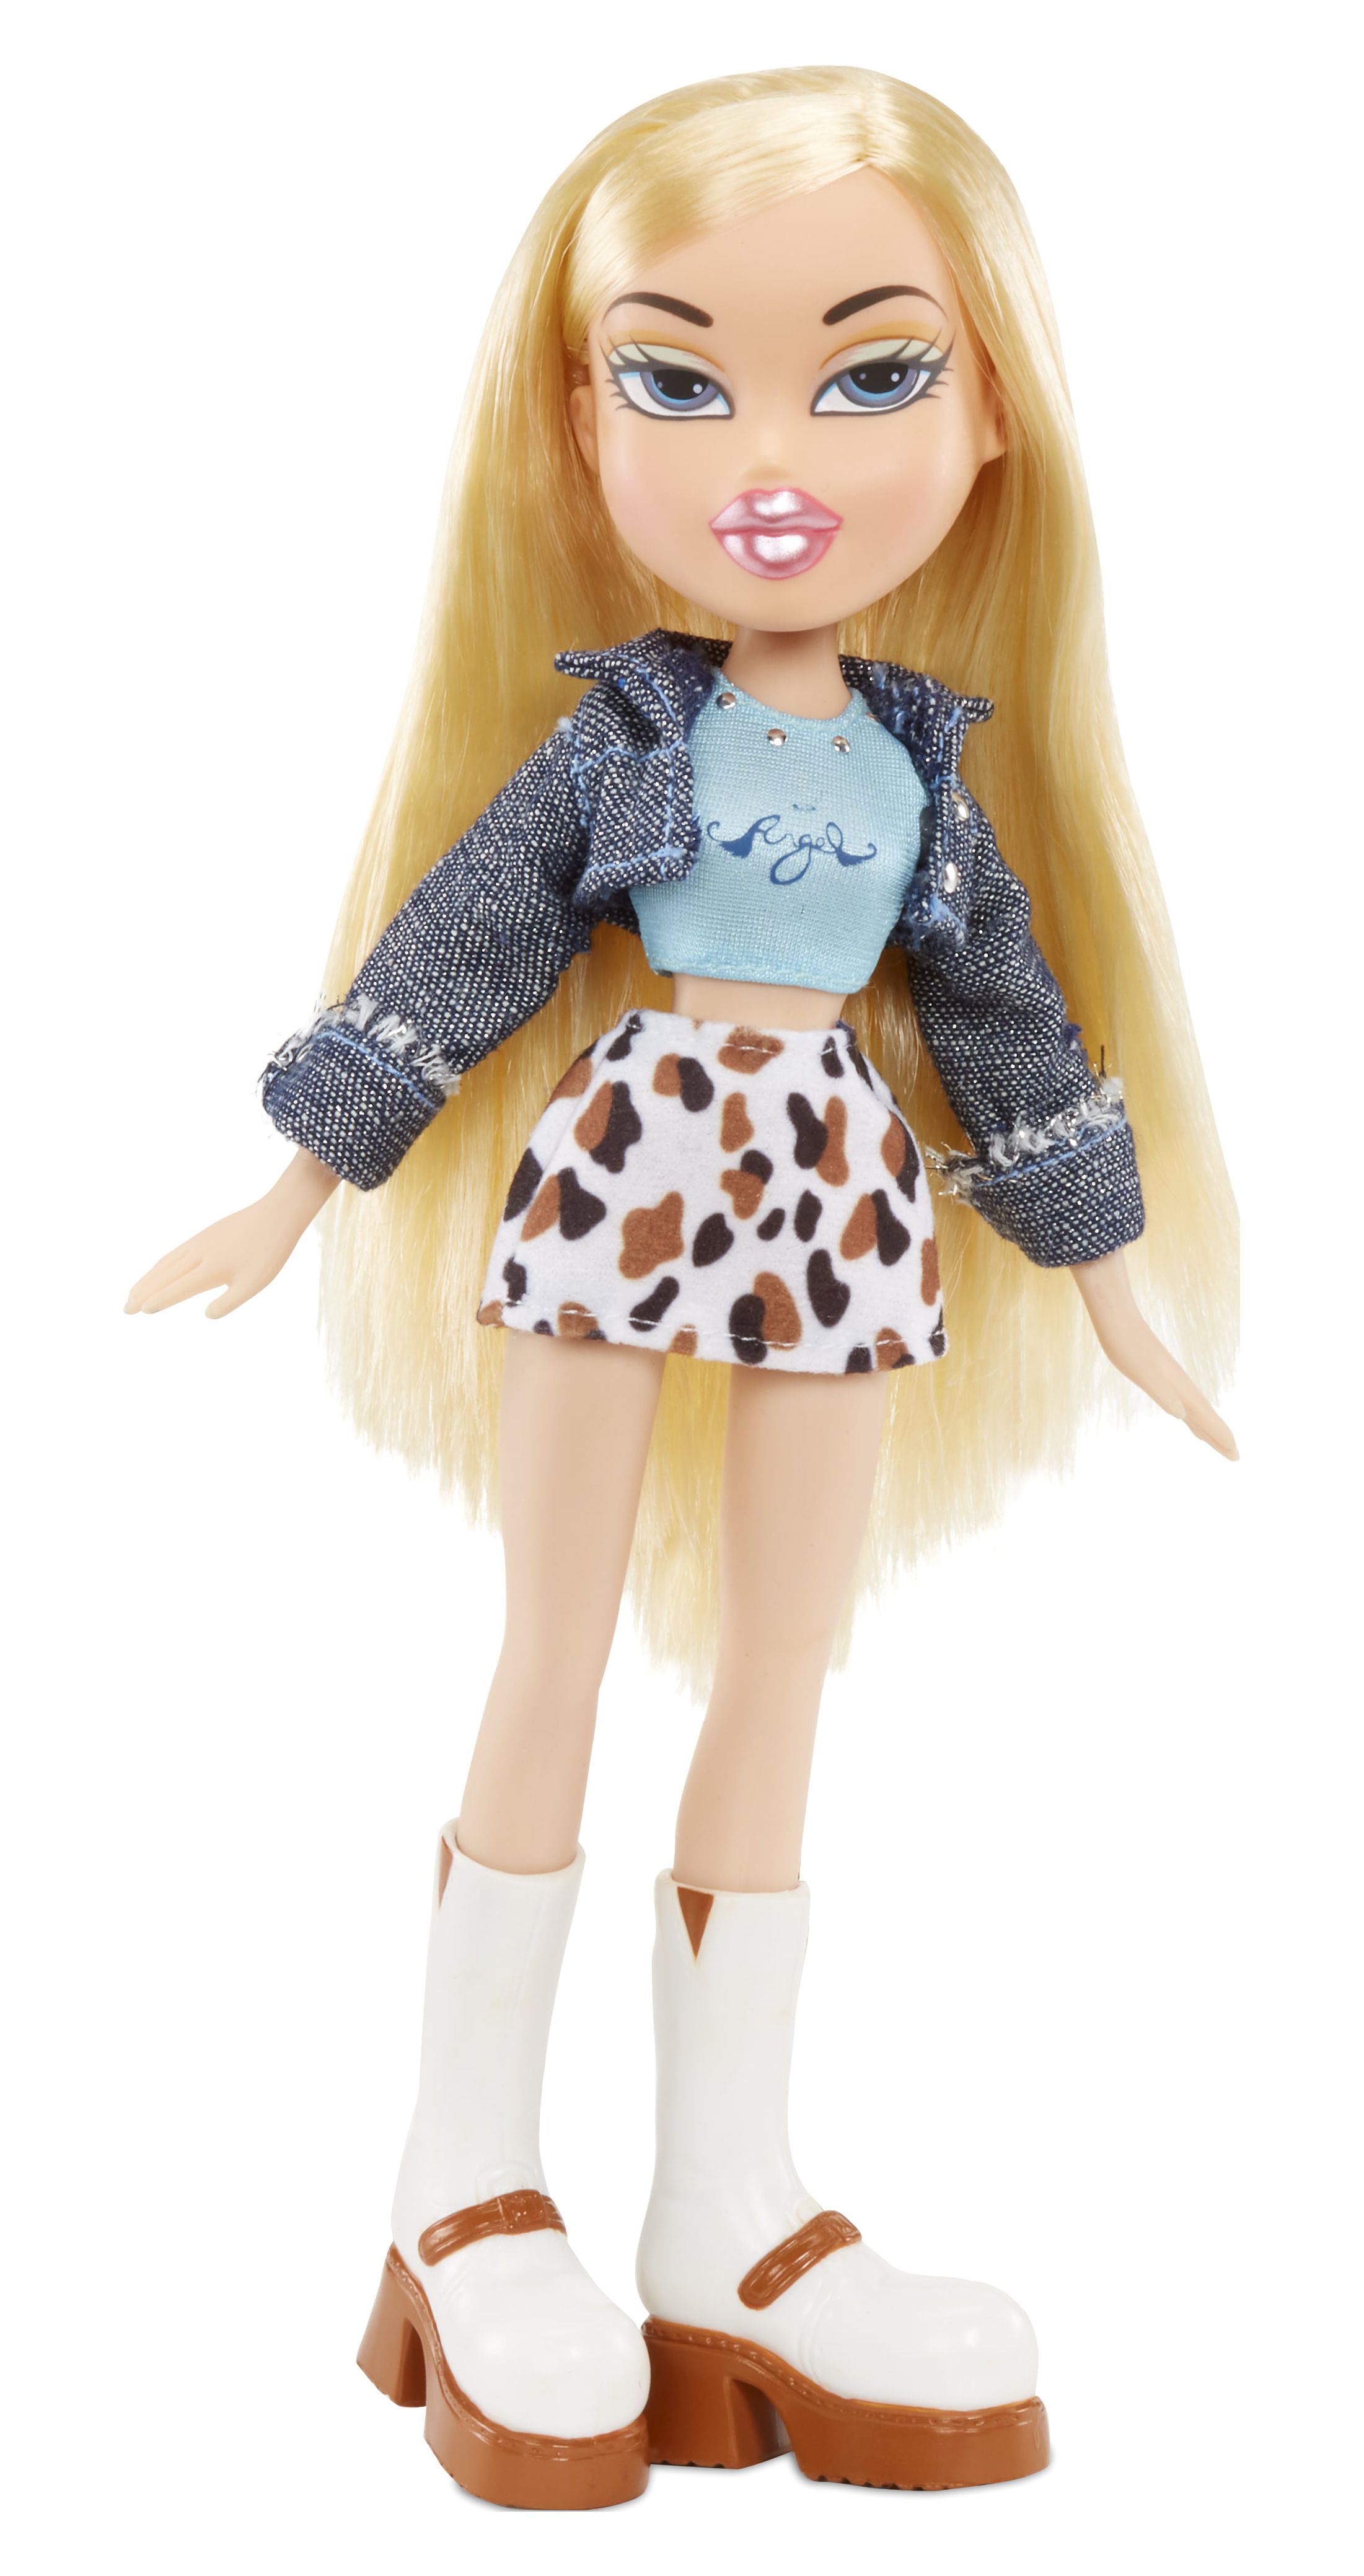 Bratz 20 Yearz Special Edition Original Fashion Doll Cloe, Great Gift for Children Ages 6, 7, 8+ - image 4 of 8